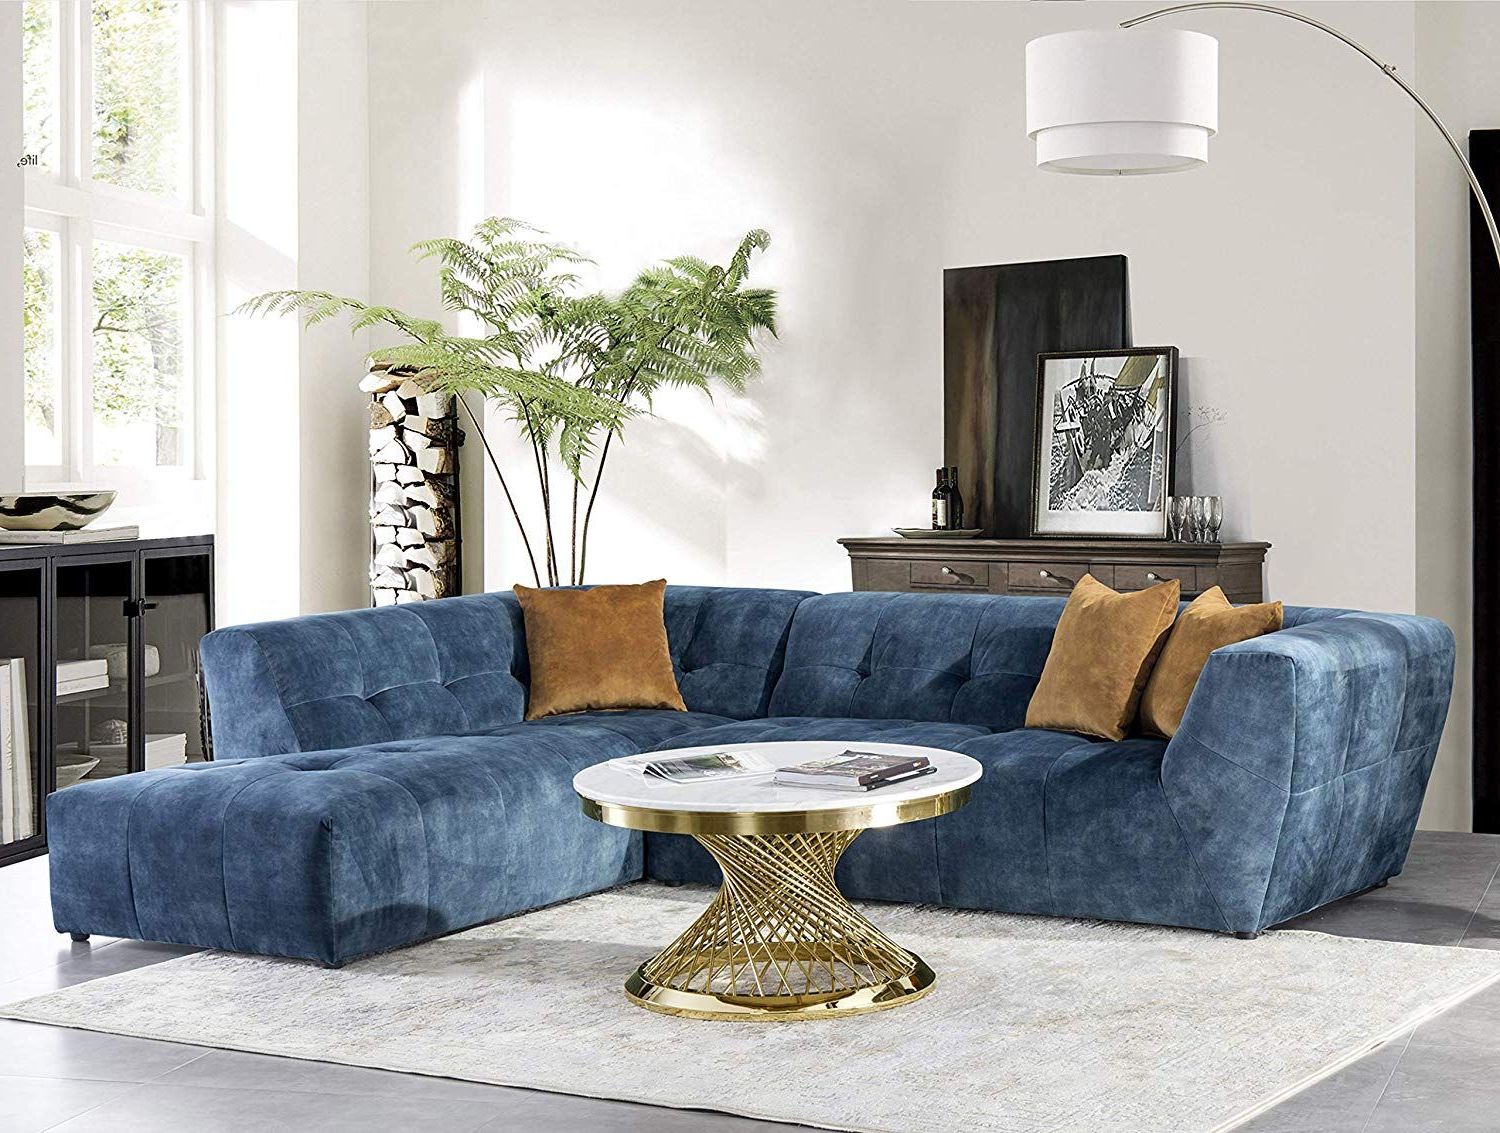 Well Liked Navy Linen Coil Sofas Inside Amazon: Acanva Luxury Mid Century Tufted Low Back Right Facing (View 15 of 15)